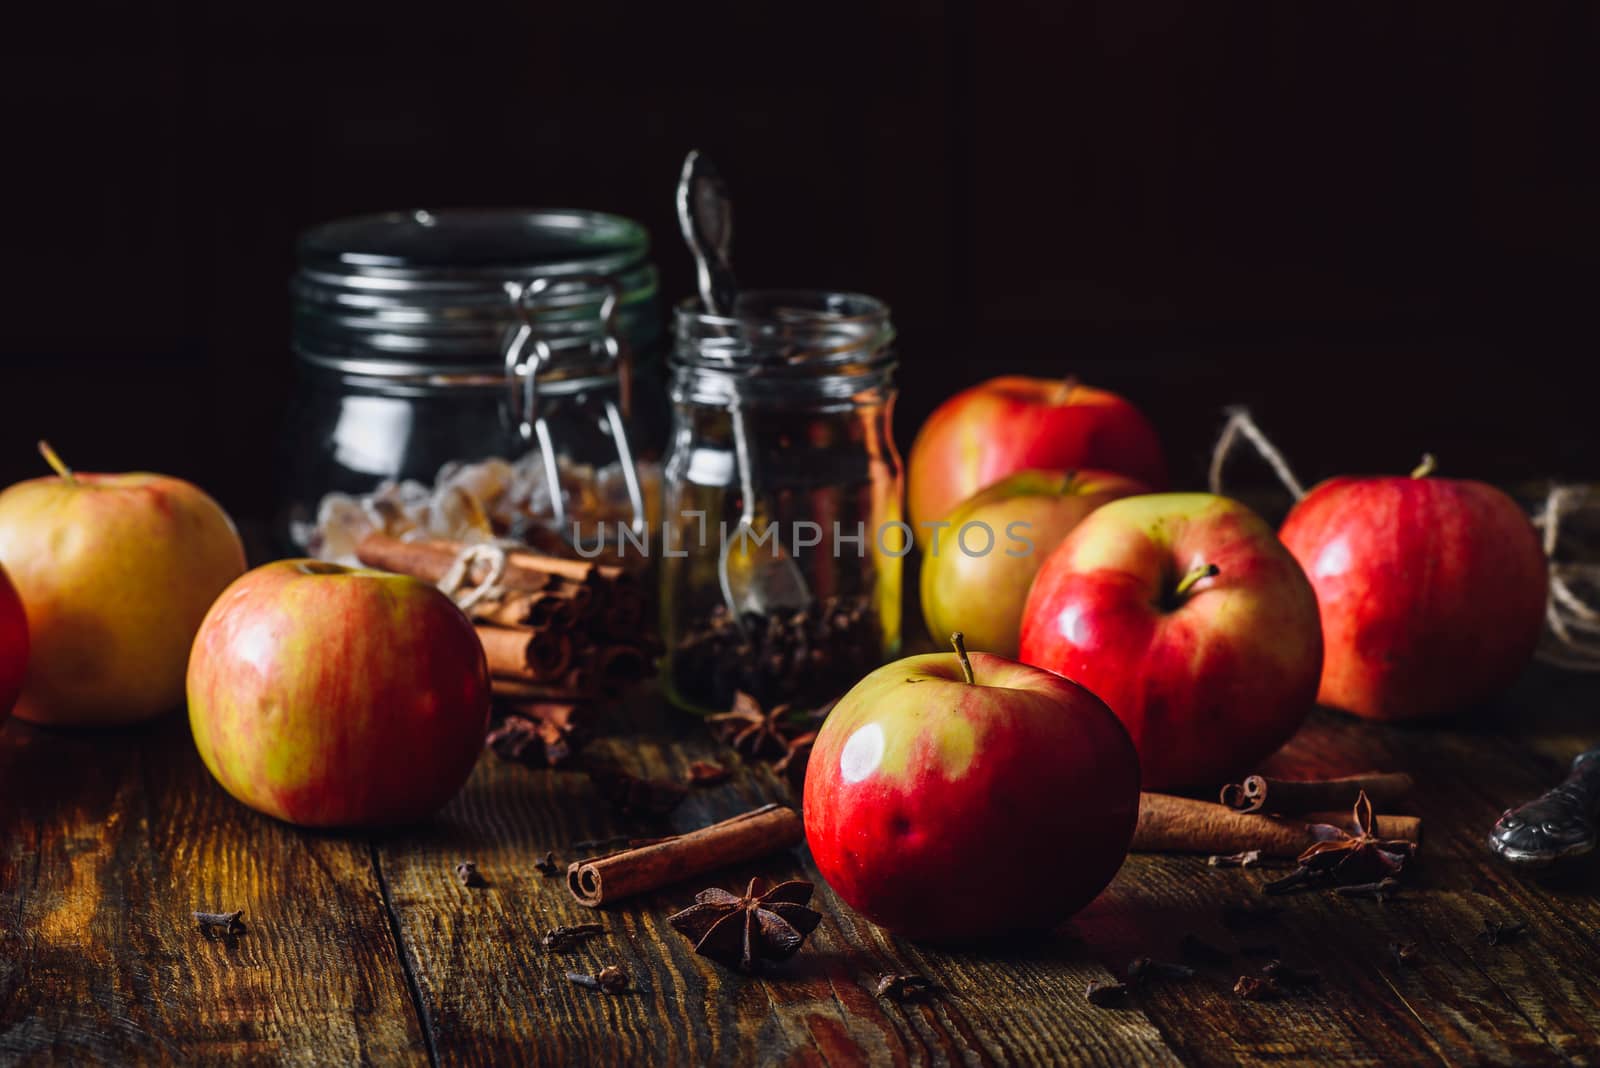 Red Apples with Different Spices for Cooking Apple Grog.